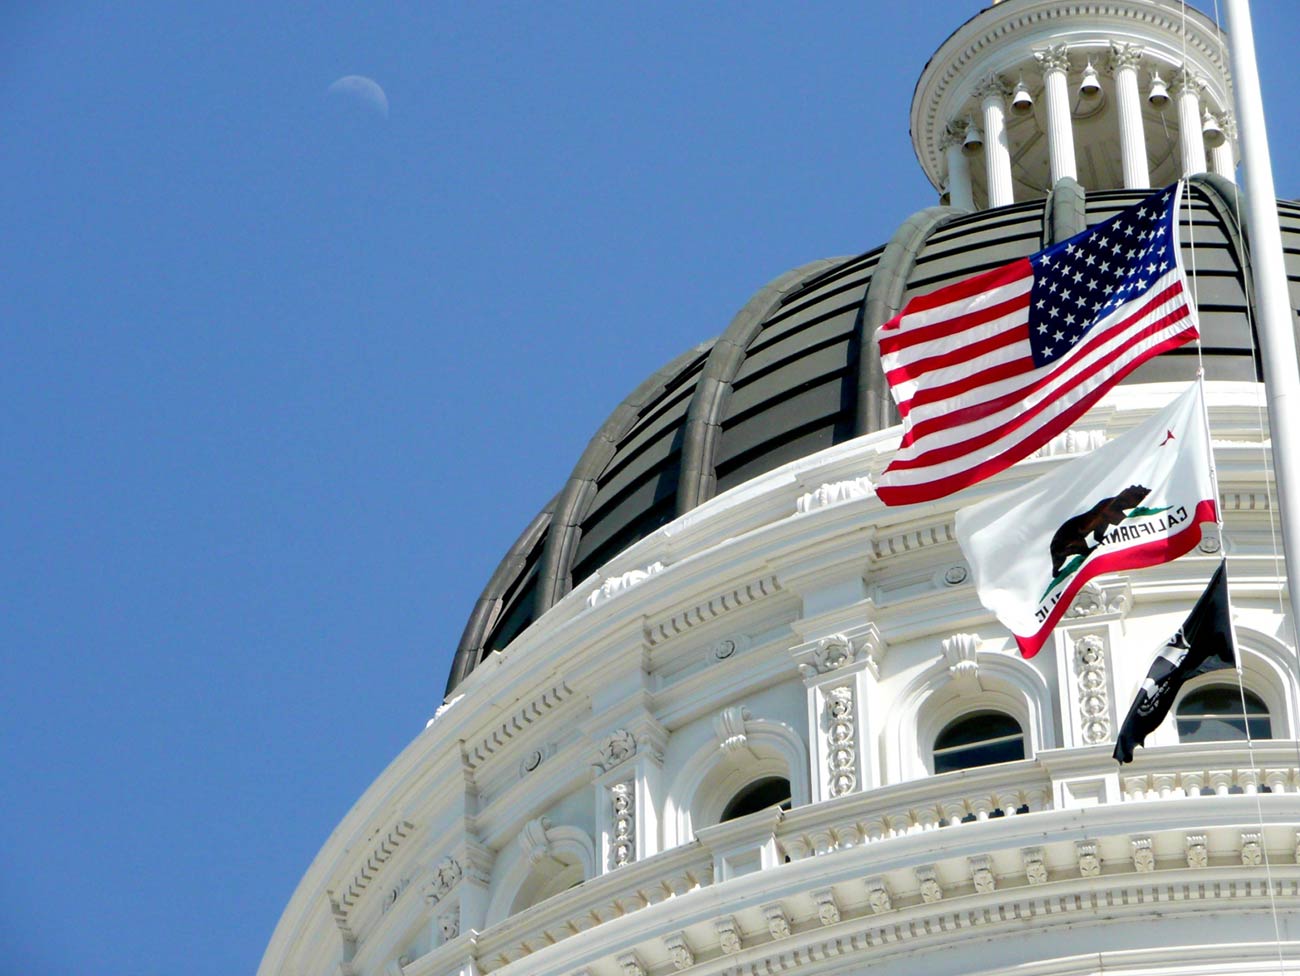 California Capitol building dome with the U.S. and California state flags flying in the wind in front of it.